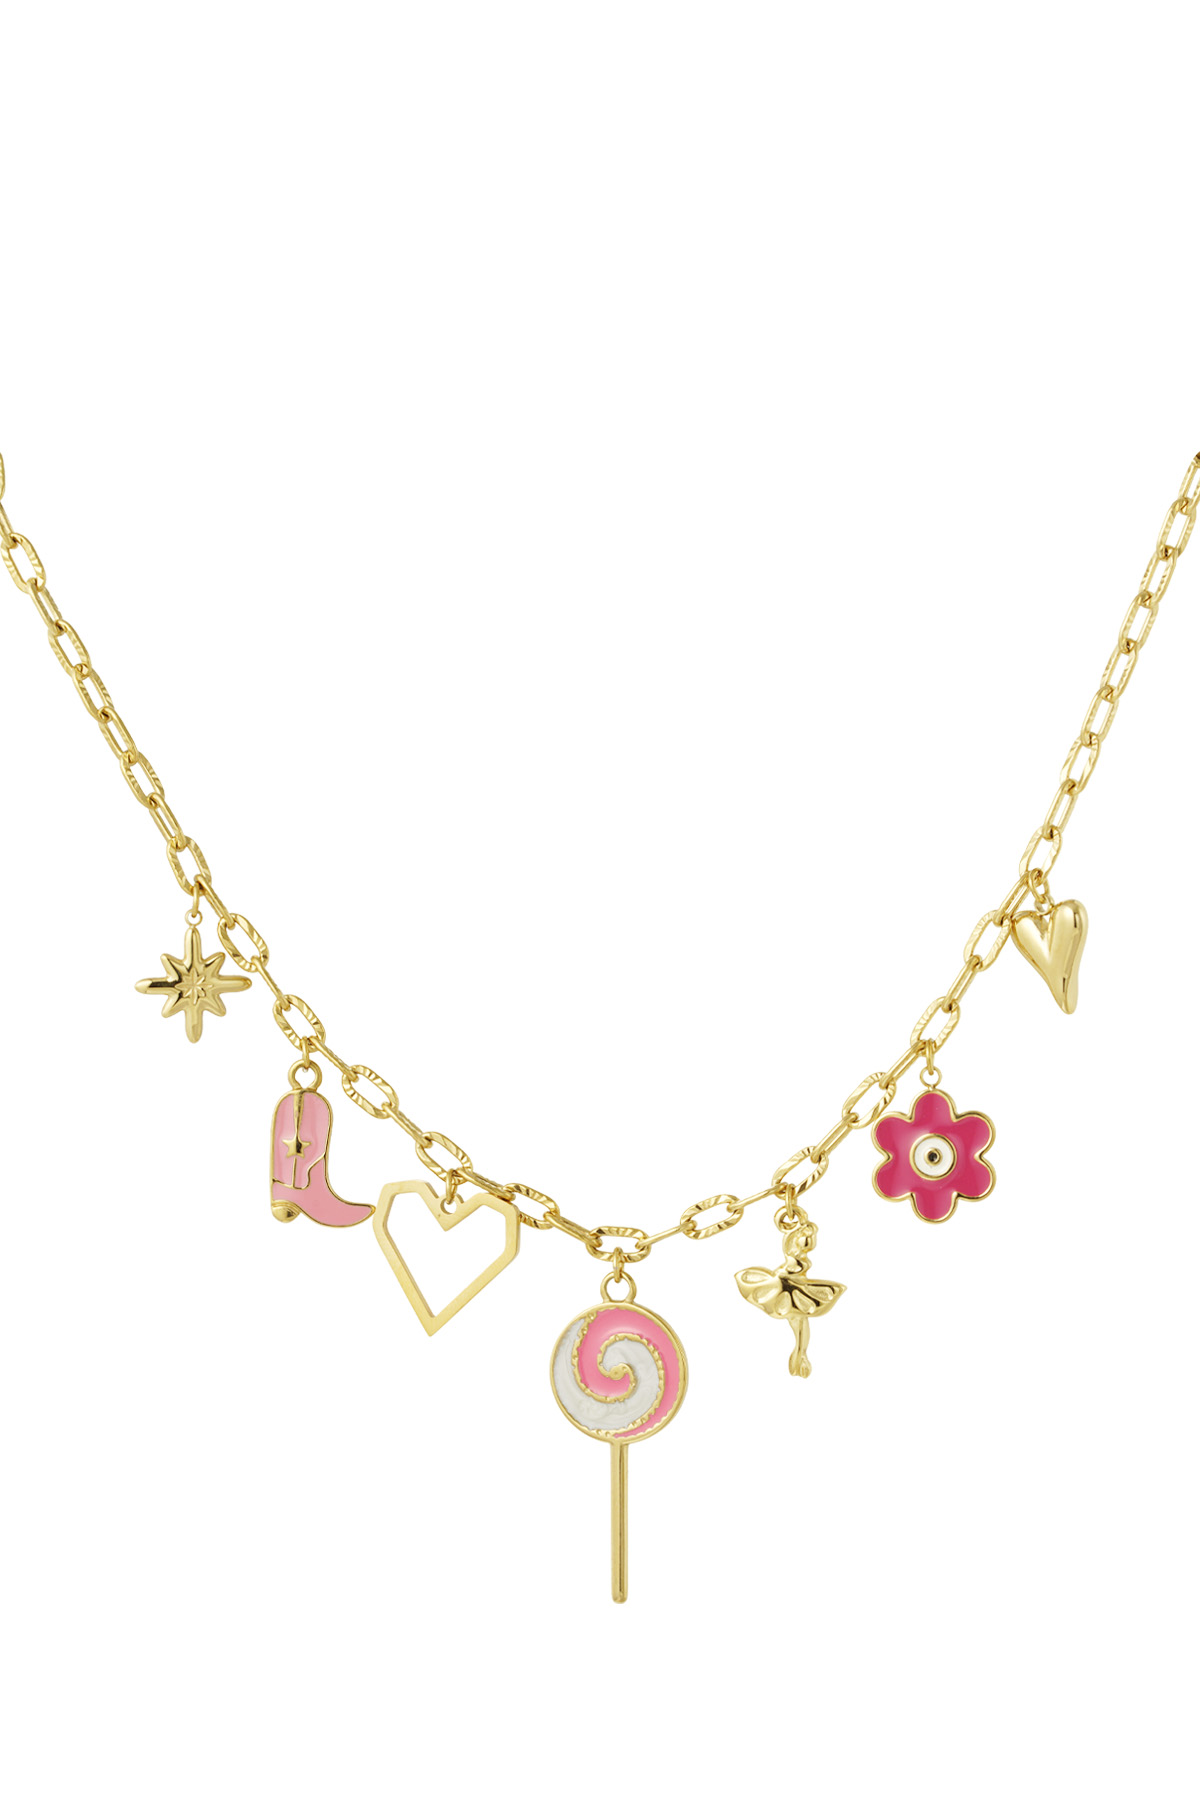 Candy store charm necklace - pink/gold  